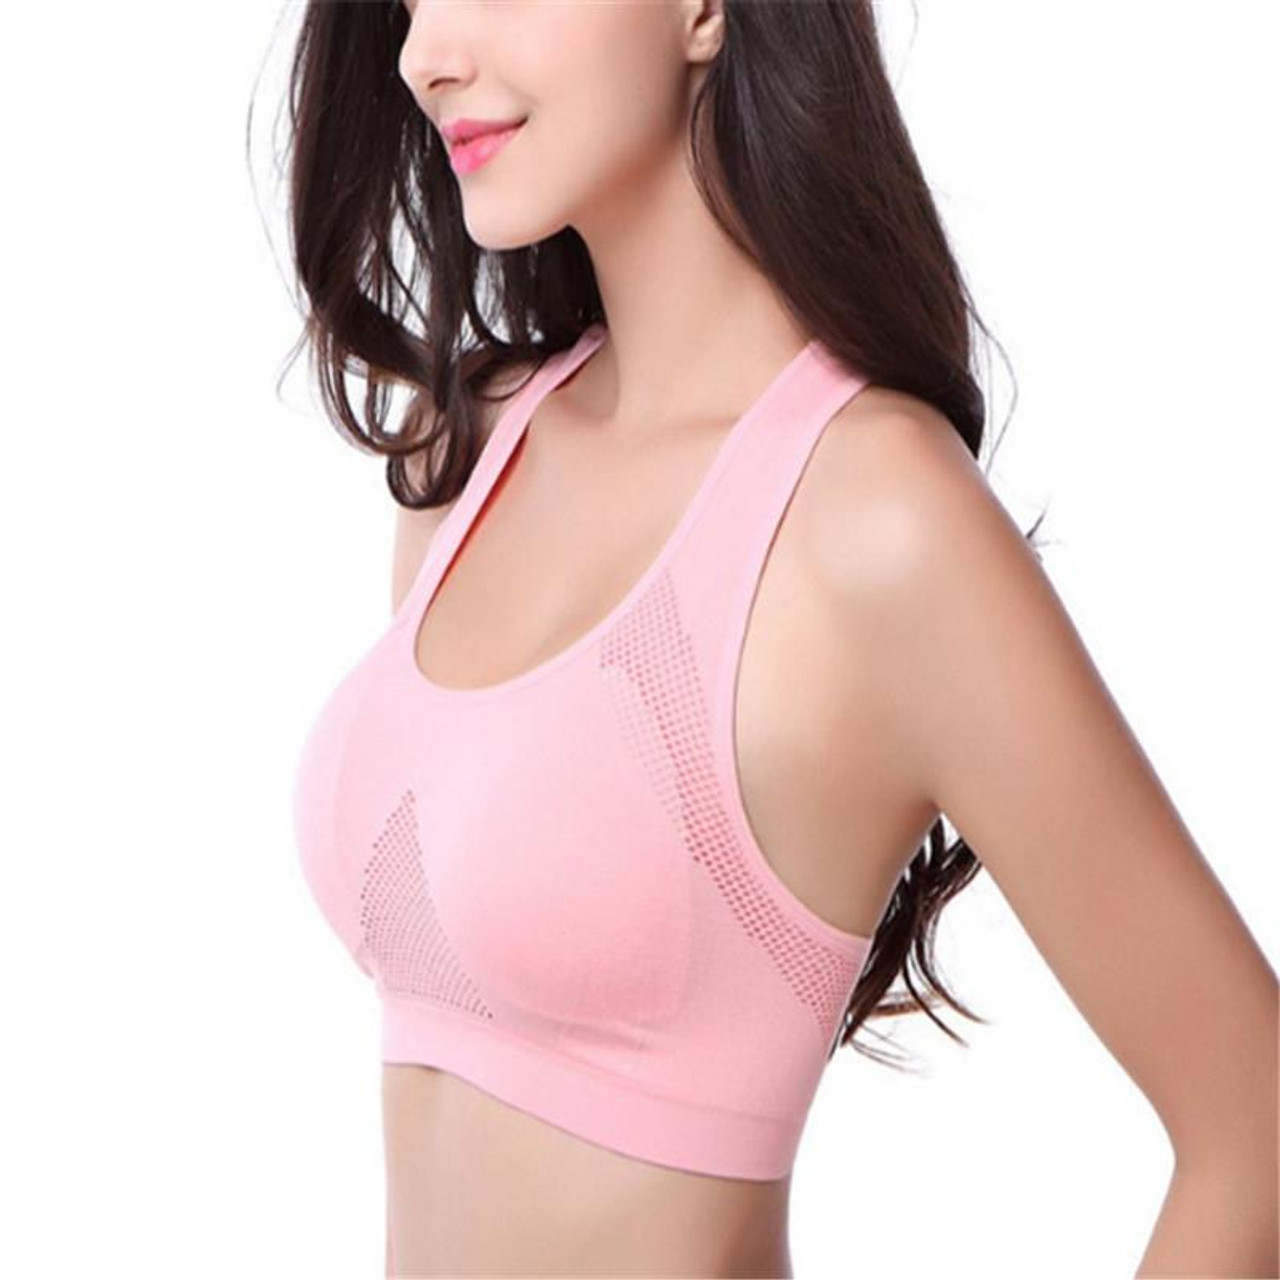 High Stretch Breathable Top Fitness Women Padded Sports Bra, Size:XL (Pink)